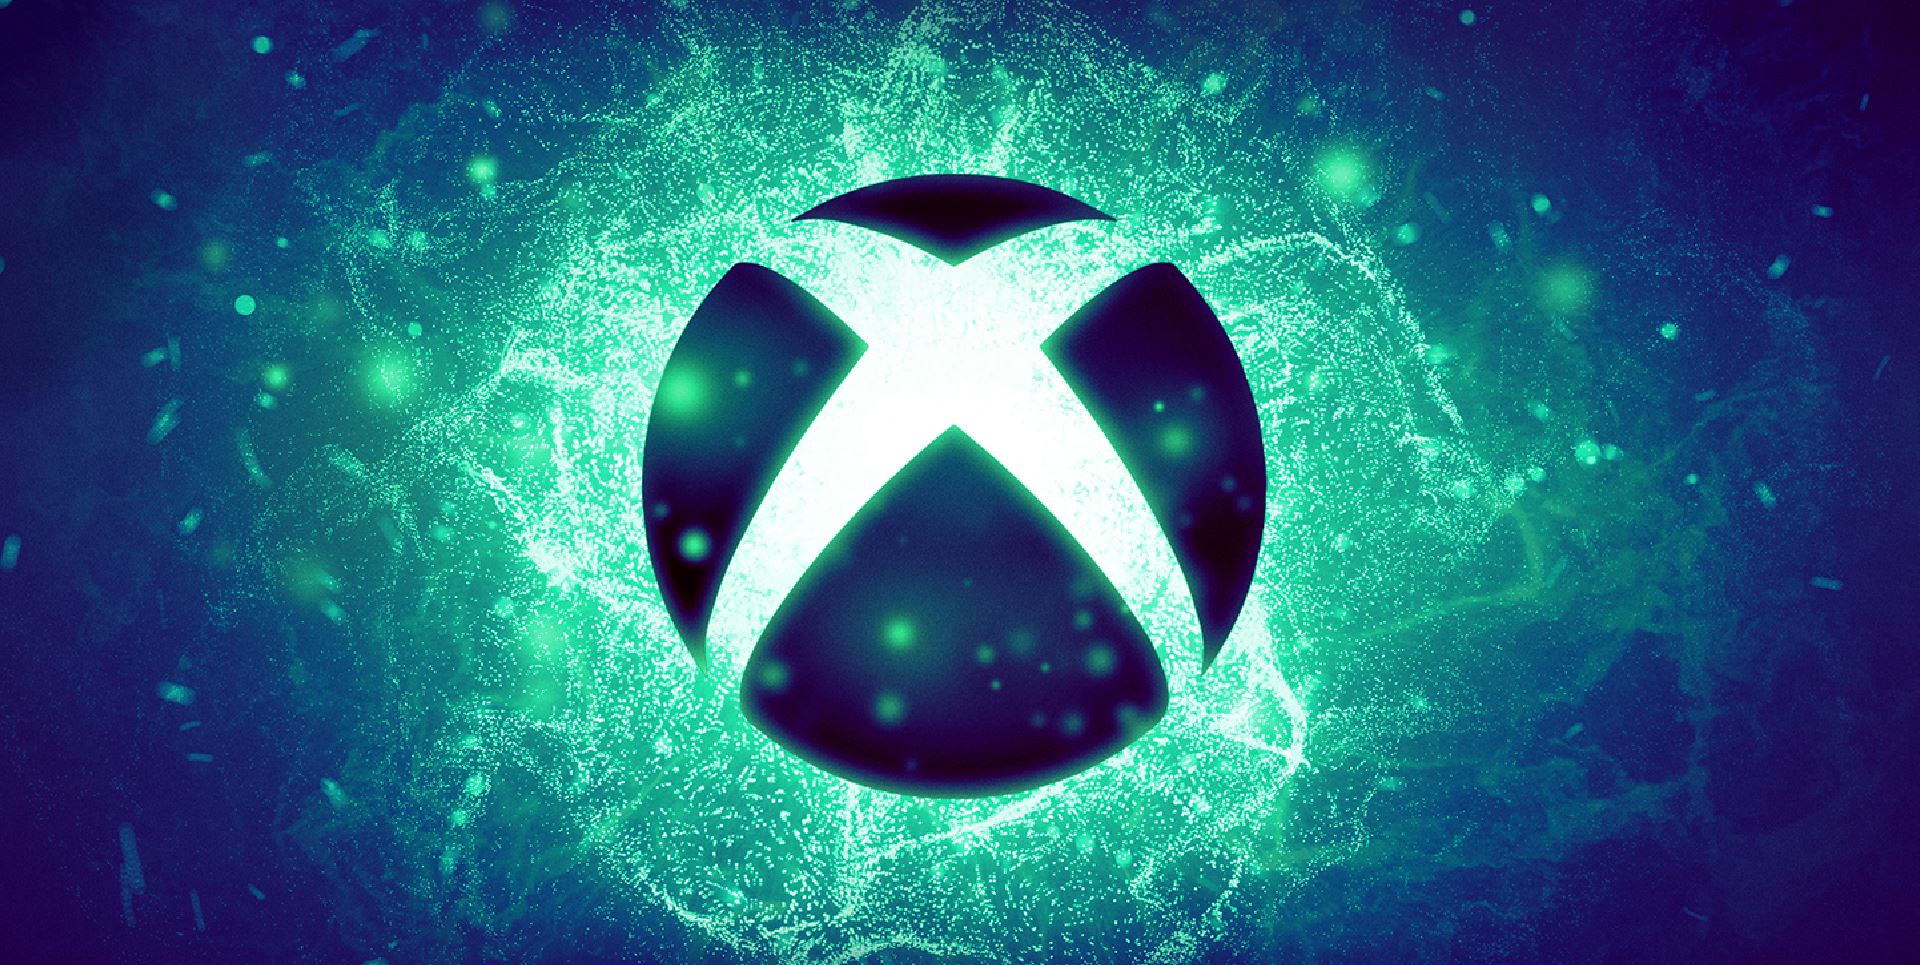 Every Xbox game revealed in Microsoft leak: Dishonored 3, Fallout 3 &  Oblivion remasters, more - Charlie INTEL